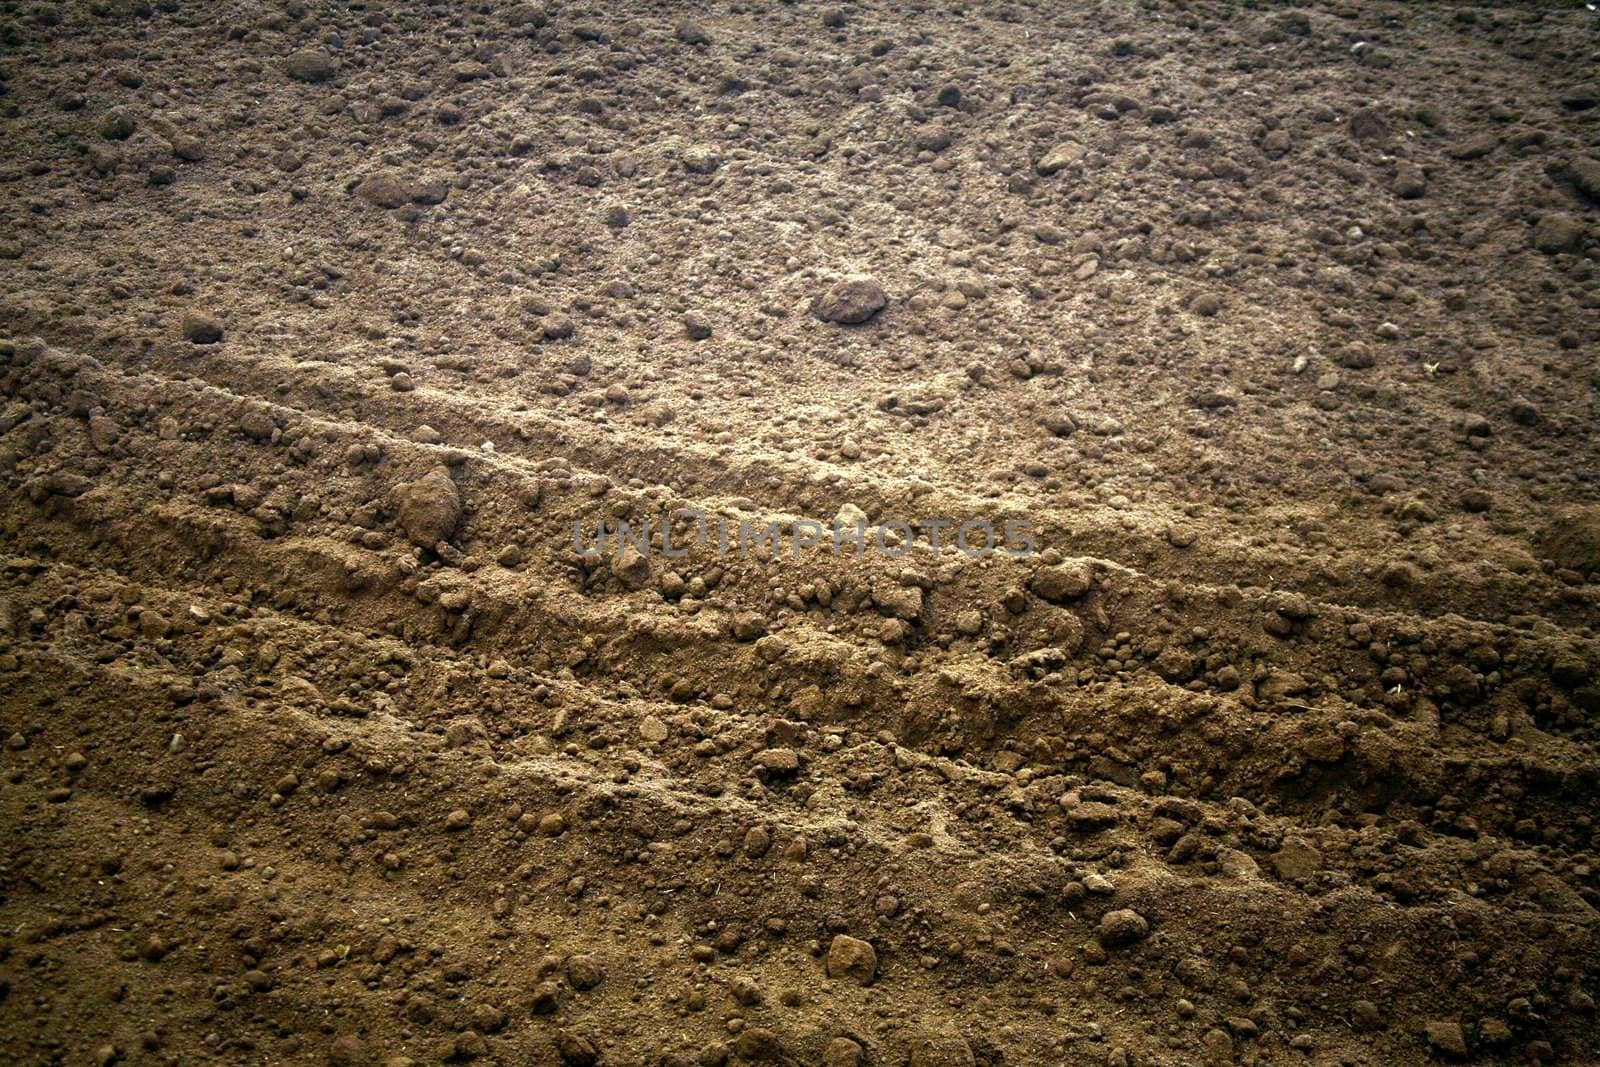 Dirt with a vehicle track running through it